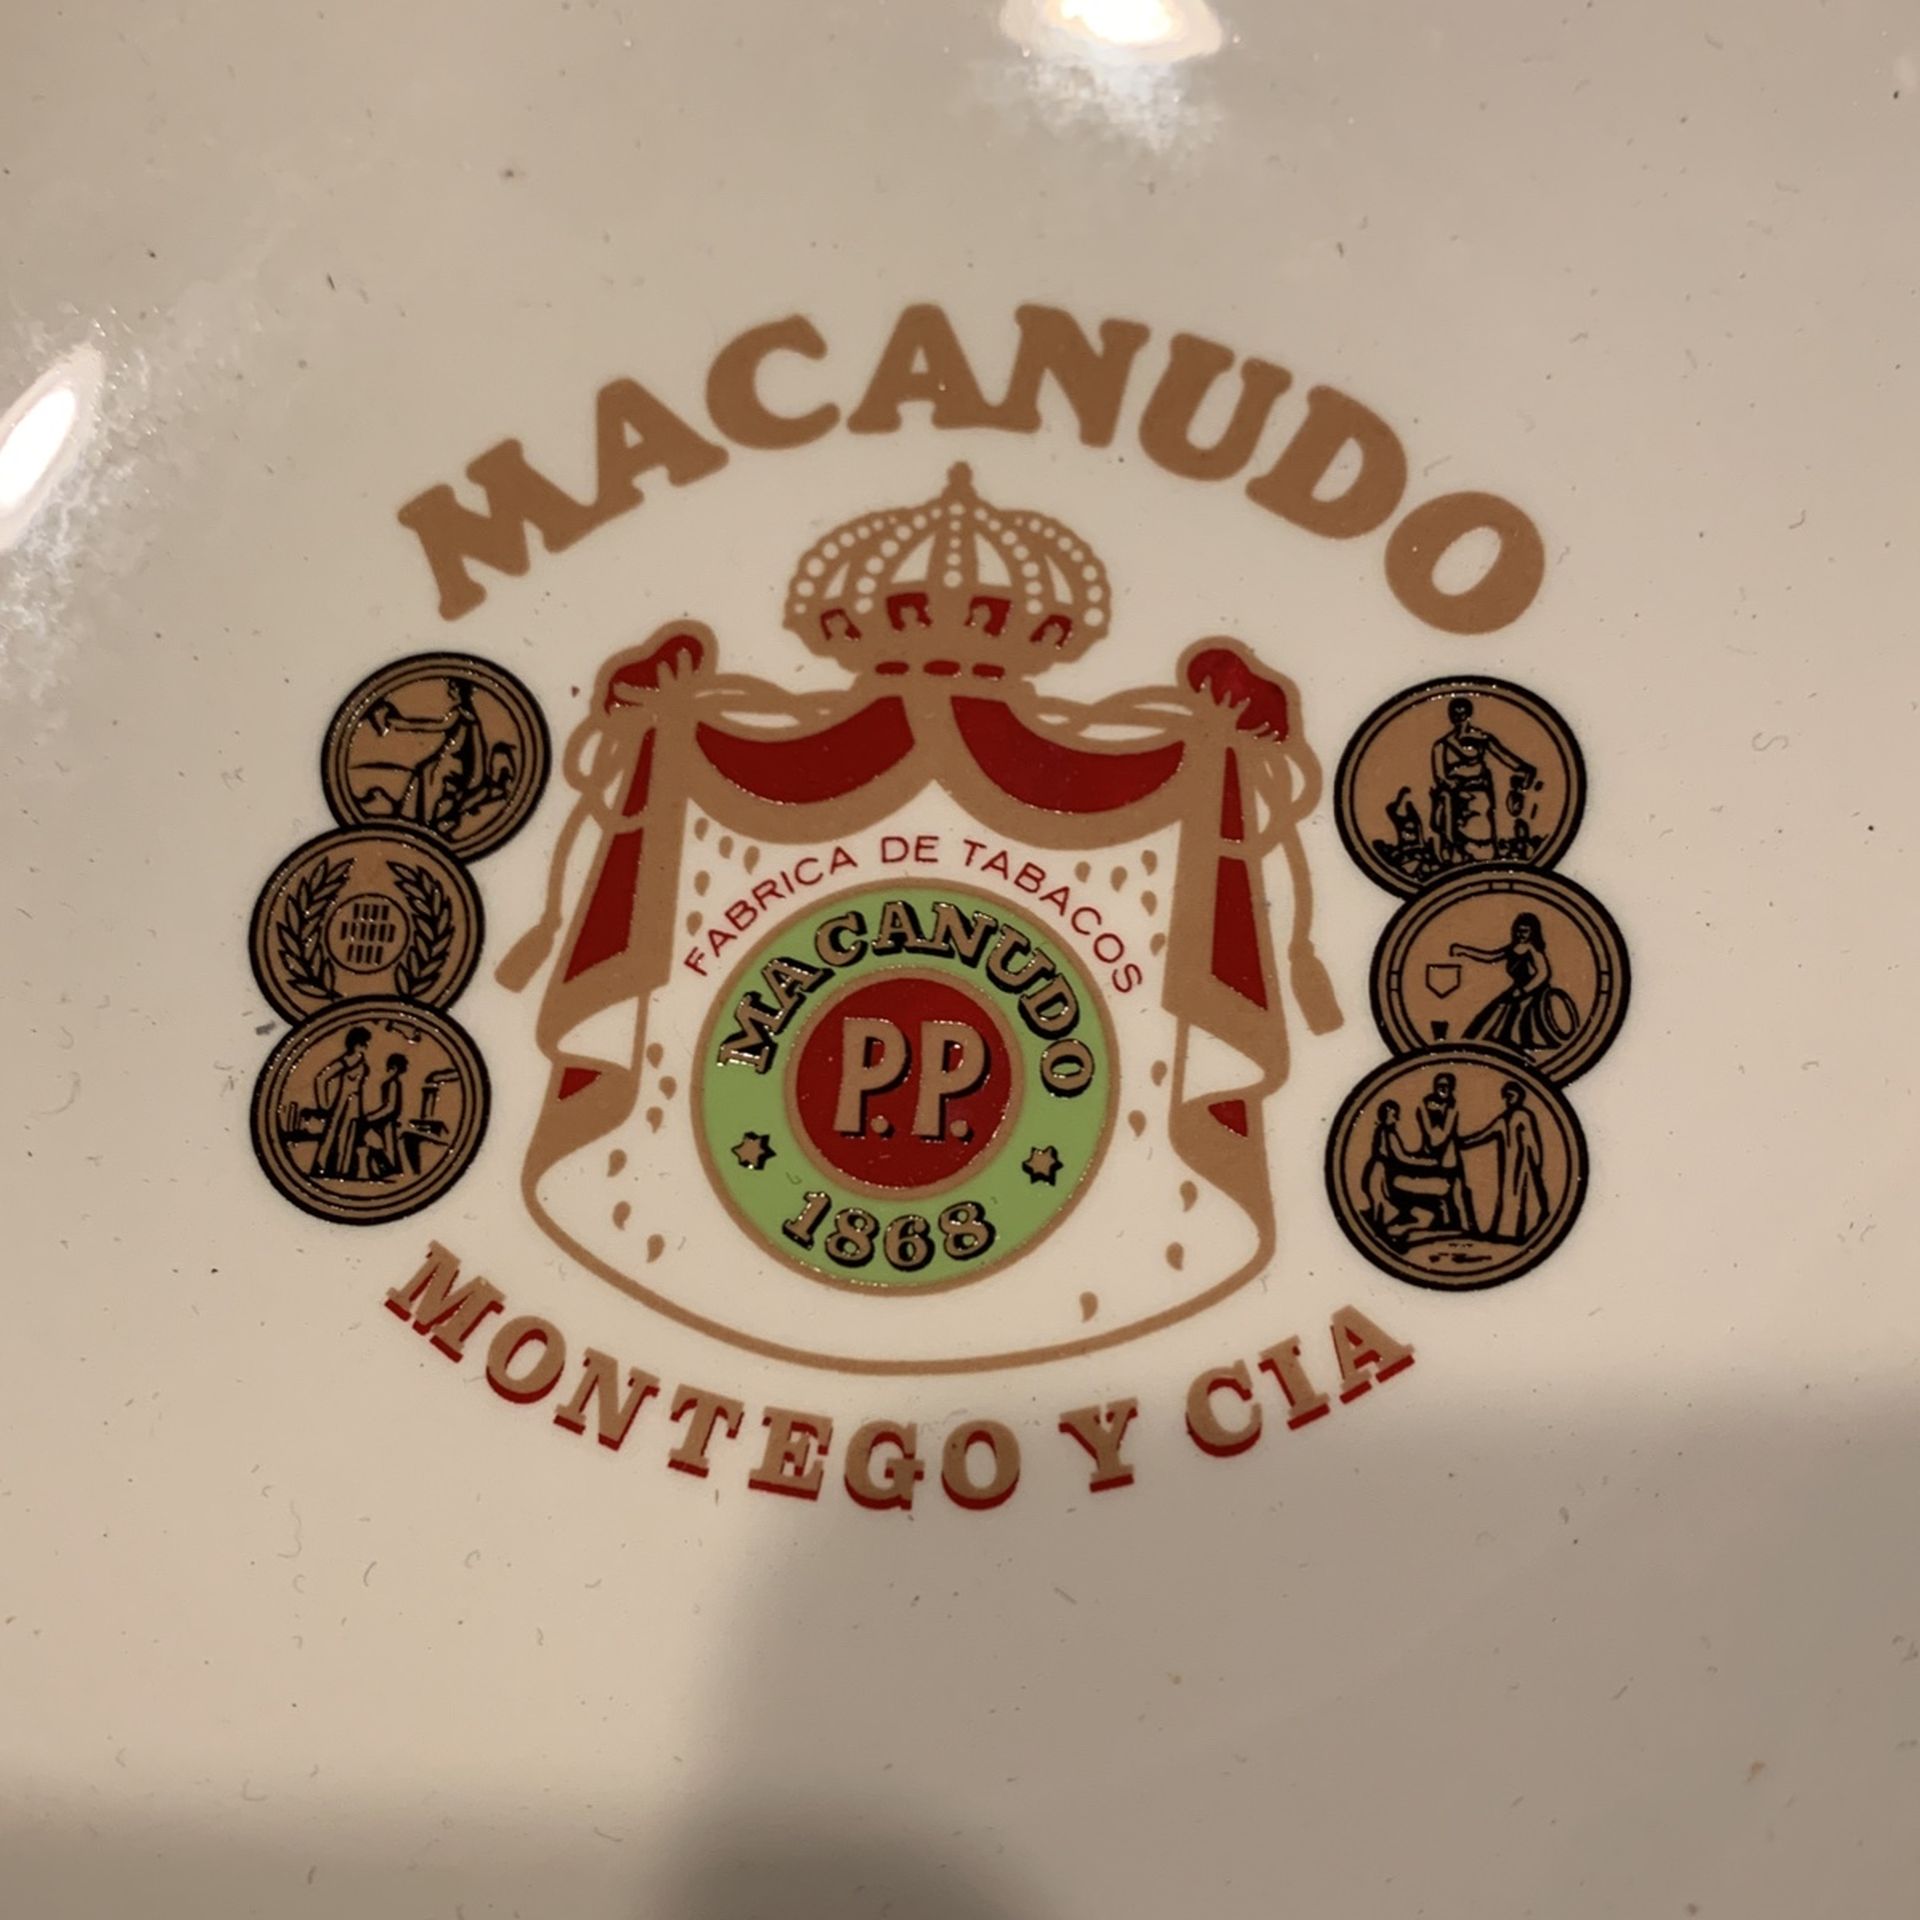 NEW Macanudo Cigar Ashtray (silver) for Sale in Edgewood, WA - OfferUp